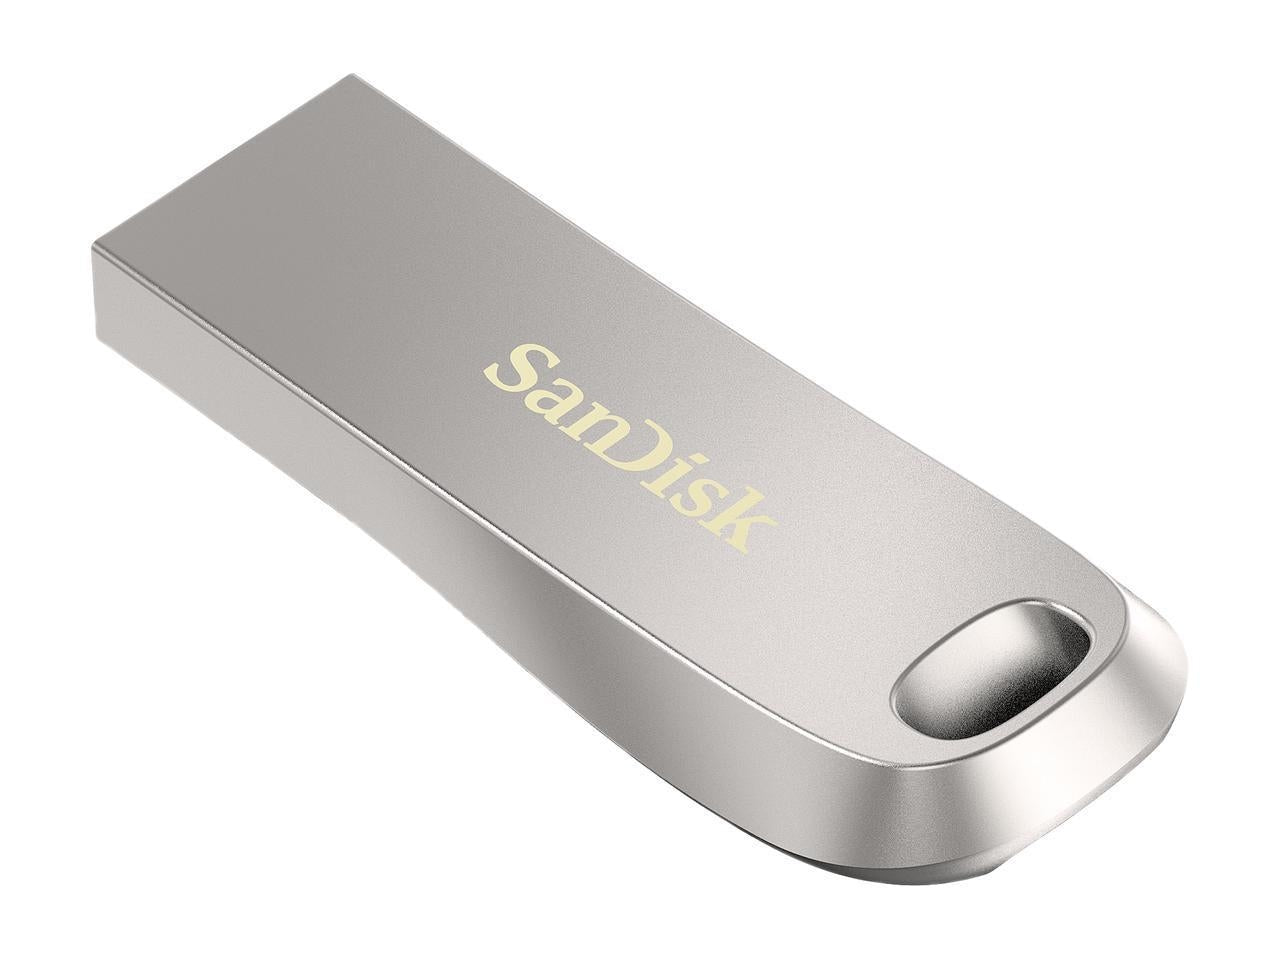 SANDISK SDCZ74-064G-G46 64G  ULTRA LUXE PEN DRIVE 150MB USB 3.0 METAL